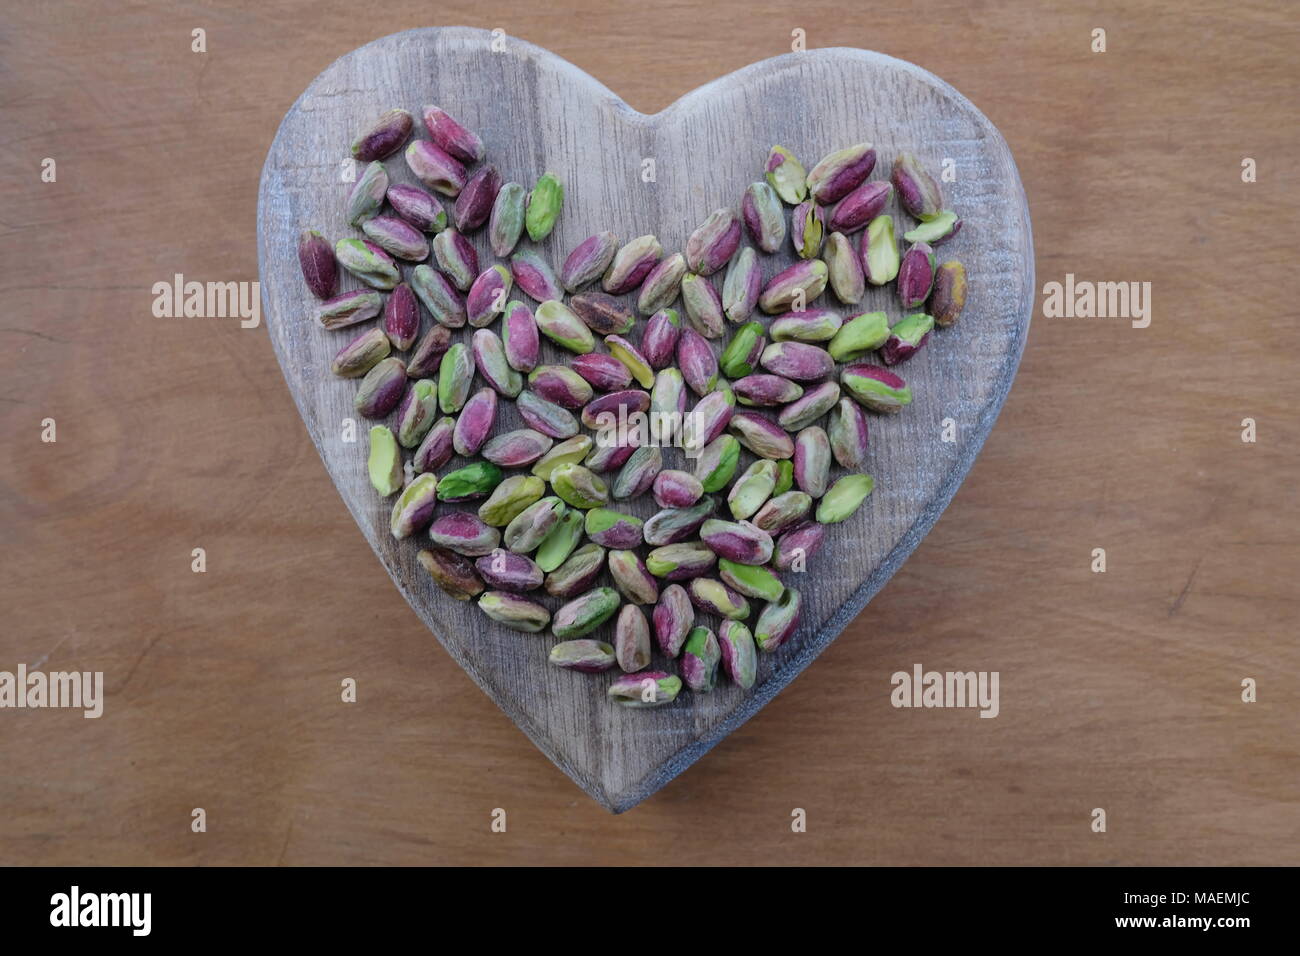 Love pistachios, with a wooden heart Stock Photo